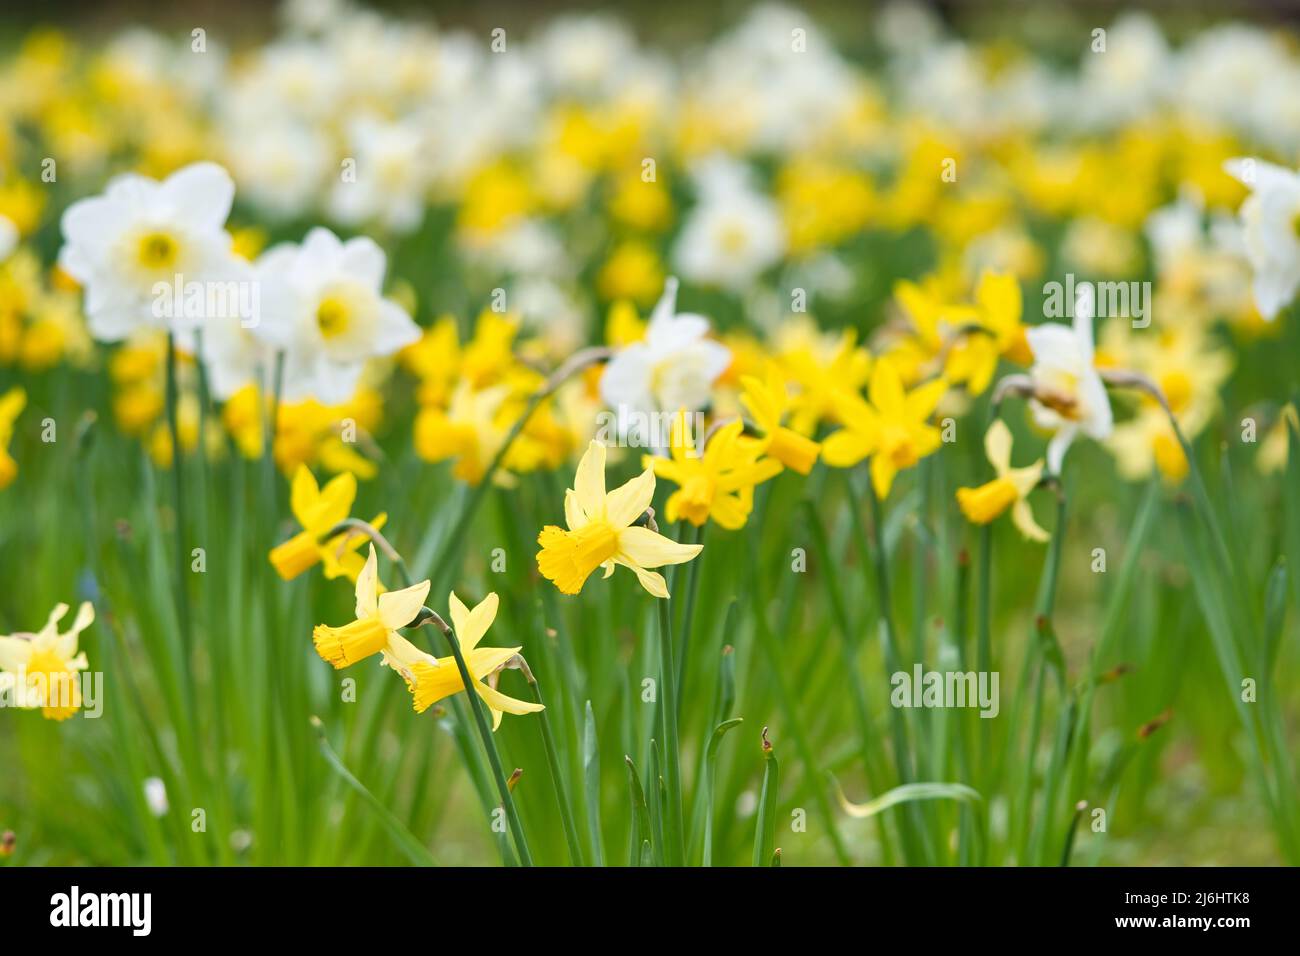 Daffodils at Easter time on a meadow. Yellow white flowers shine against the green grass. Early bloomers that announce the spring. Plants photo Stock Photo